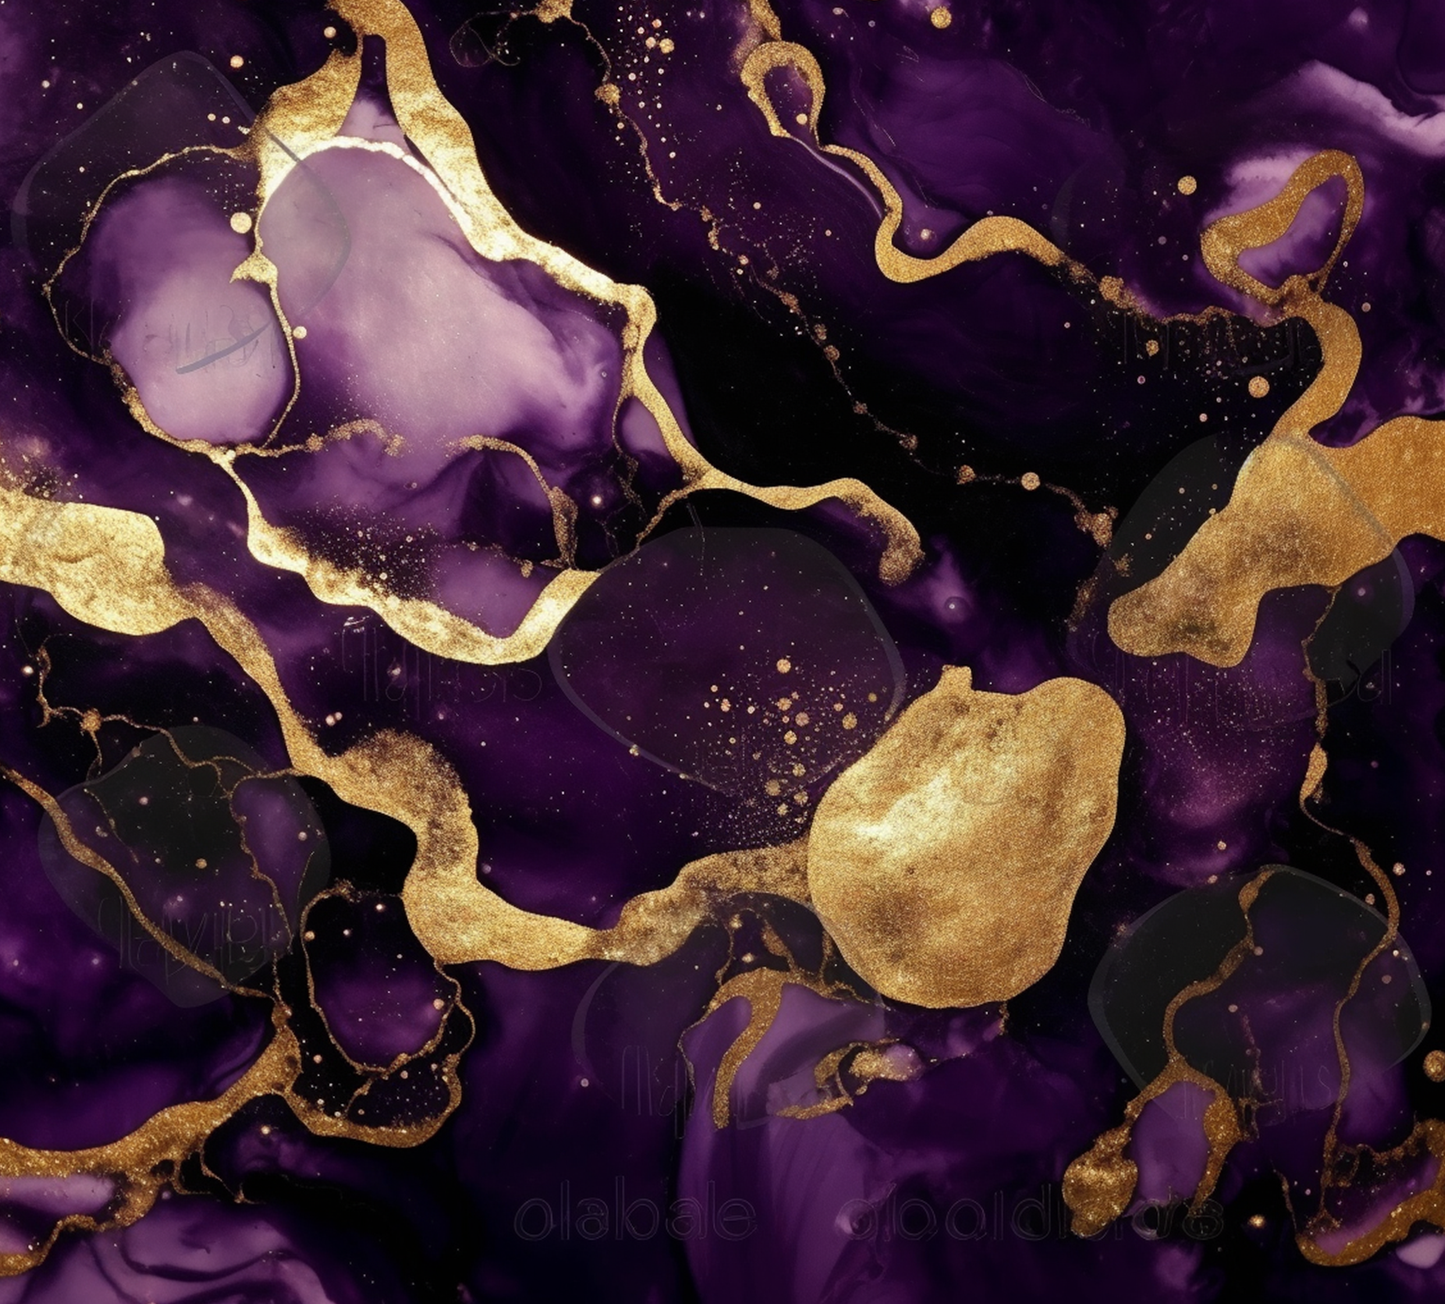 PURPLE AND GOLD INKS 131